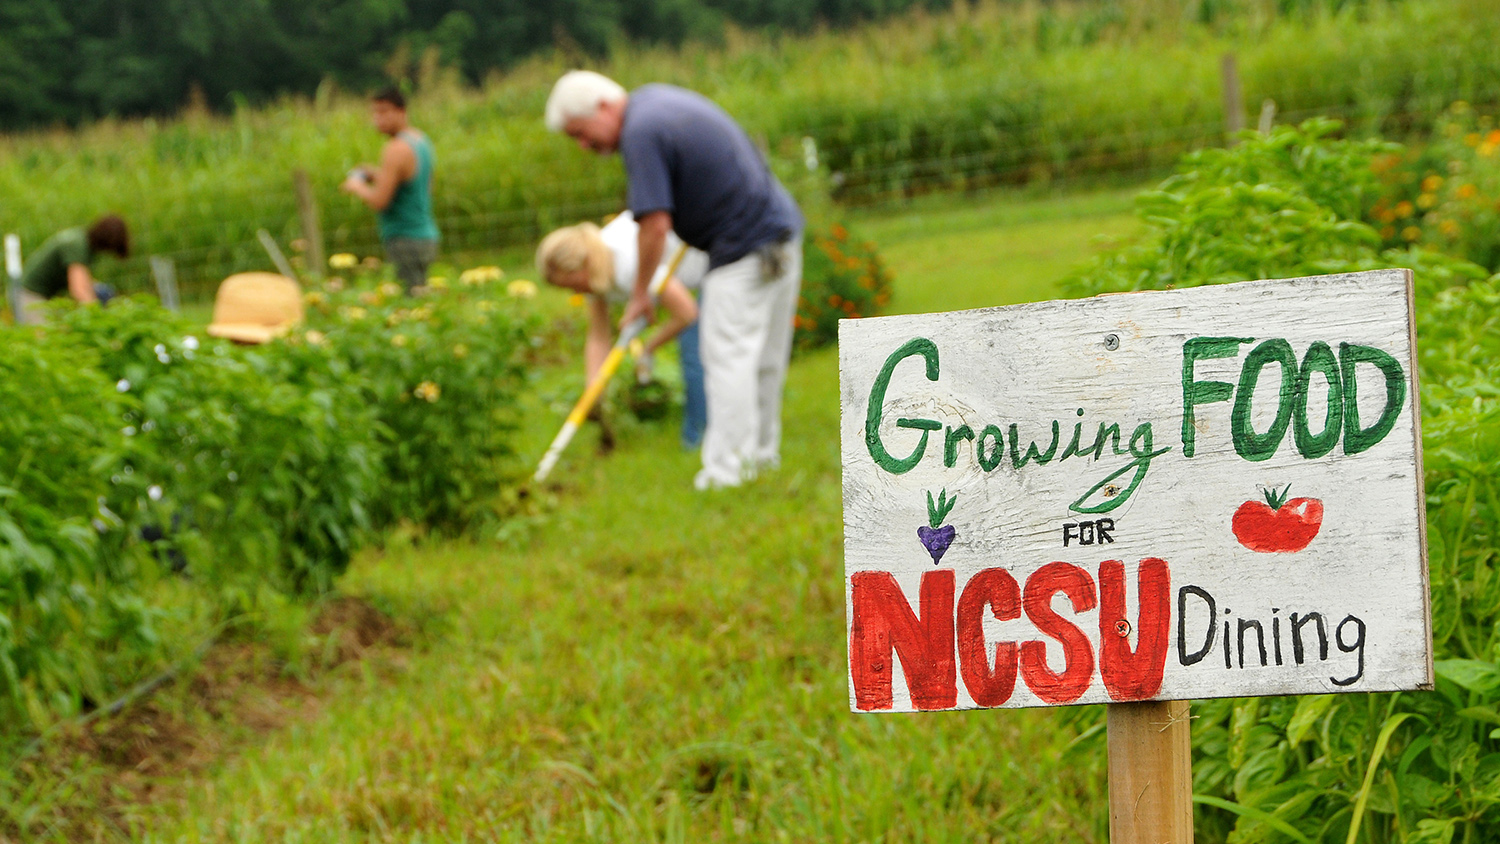 Faculty and staff volunteers weed around crops at the Agroecology Education Farm during a volunteer work day.